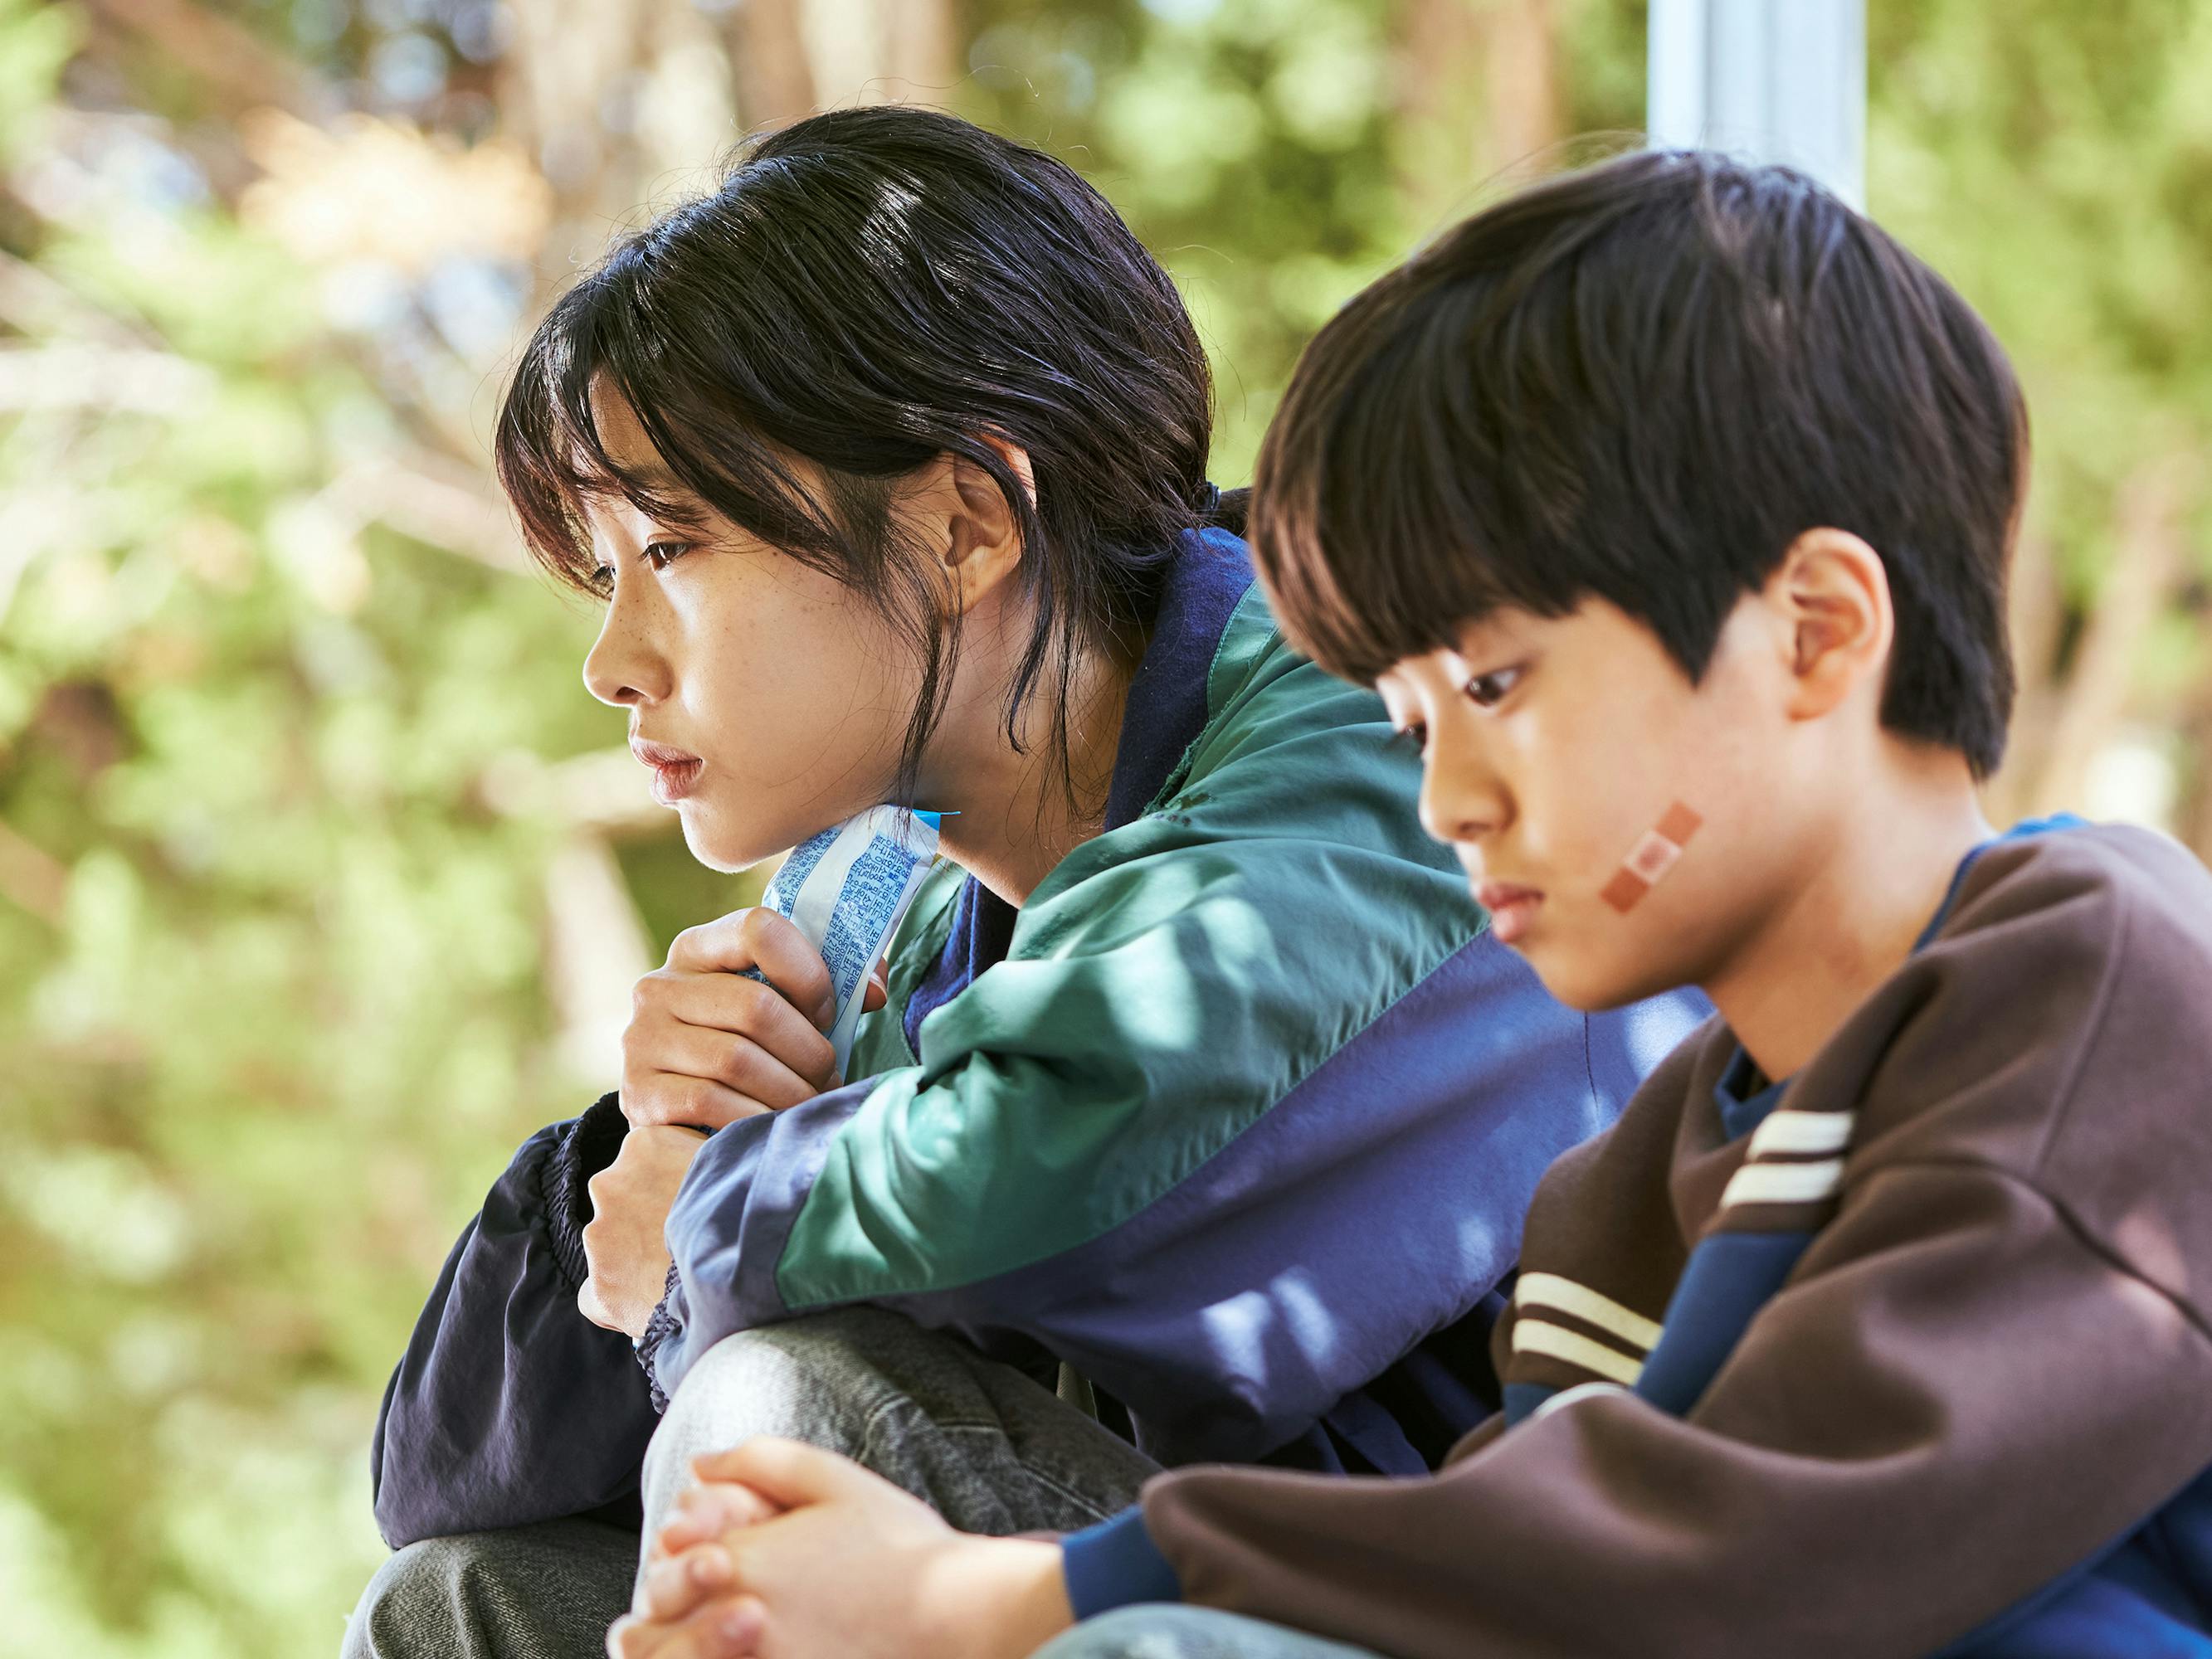 Kang Sae-byeok (Jung Ho-yeon) and Kang Cheol (Park Si-Wan) sit outside together. Sae-byeok wears a green and blue top. Kang-cheol wears a brown striped sweatshirt.